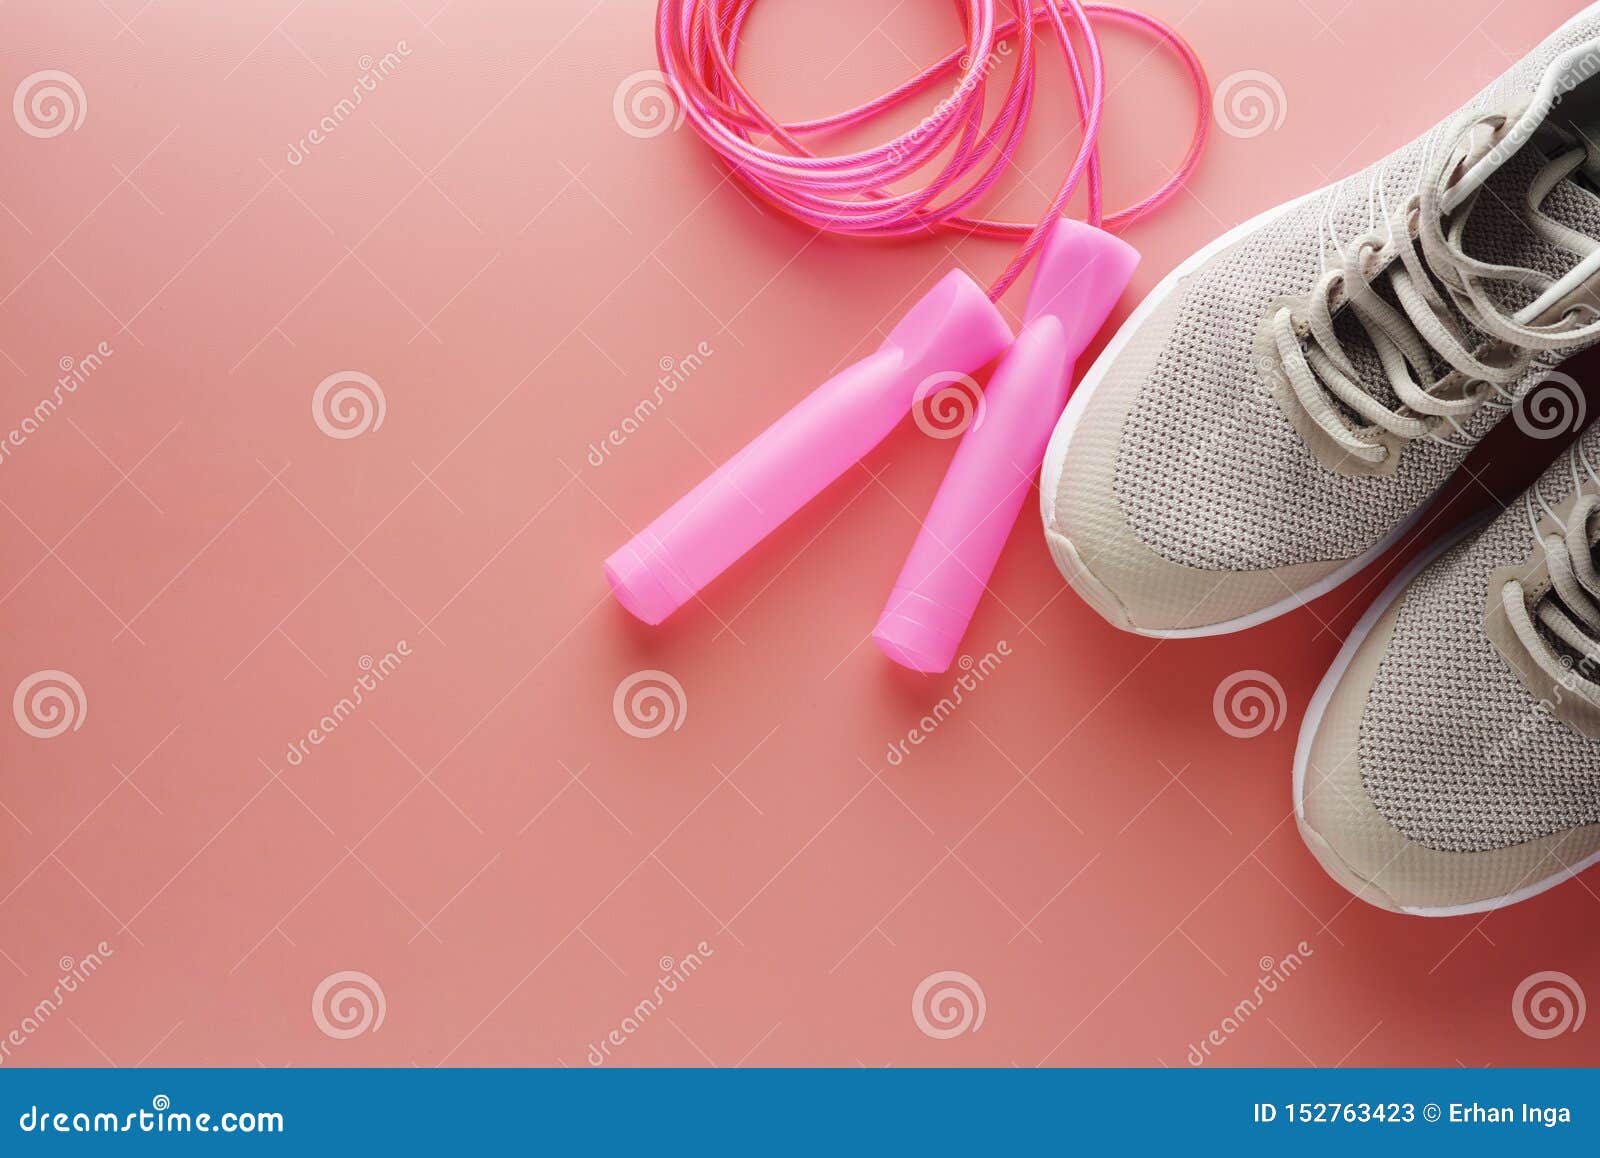 pink workout shoes